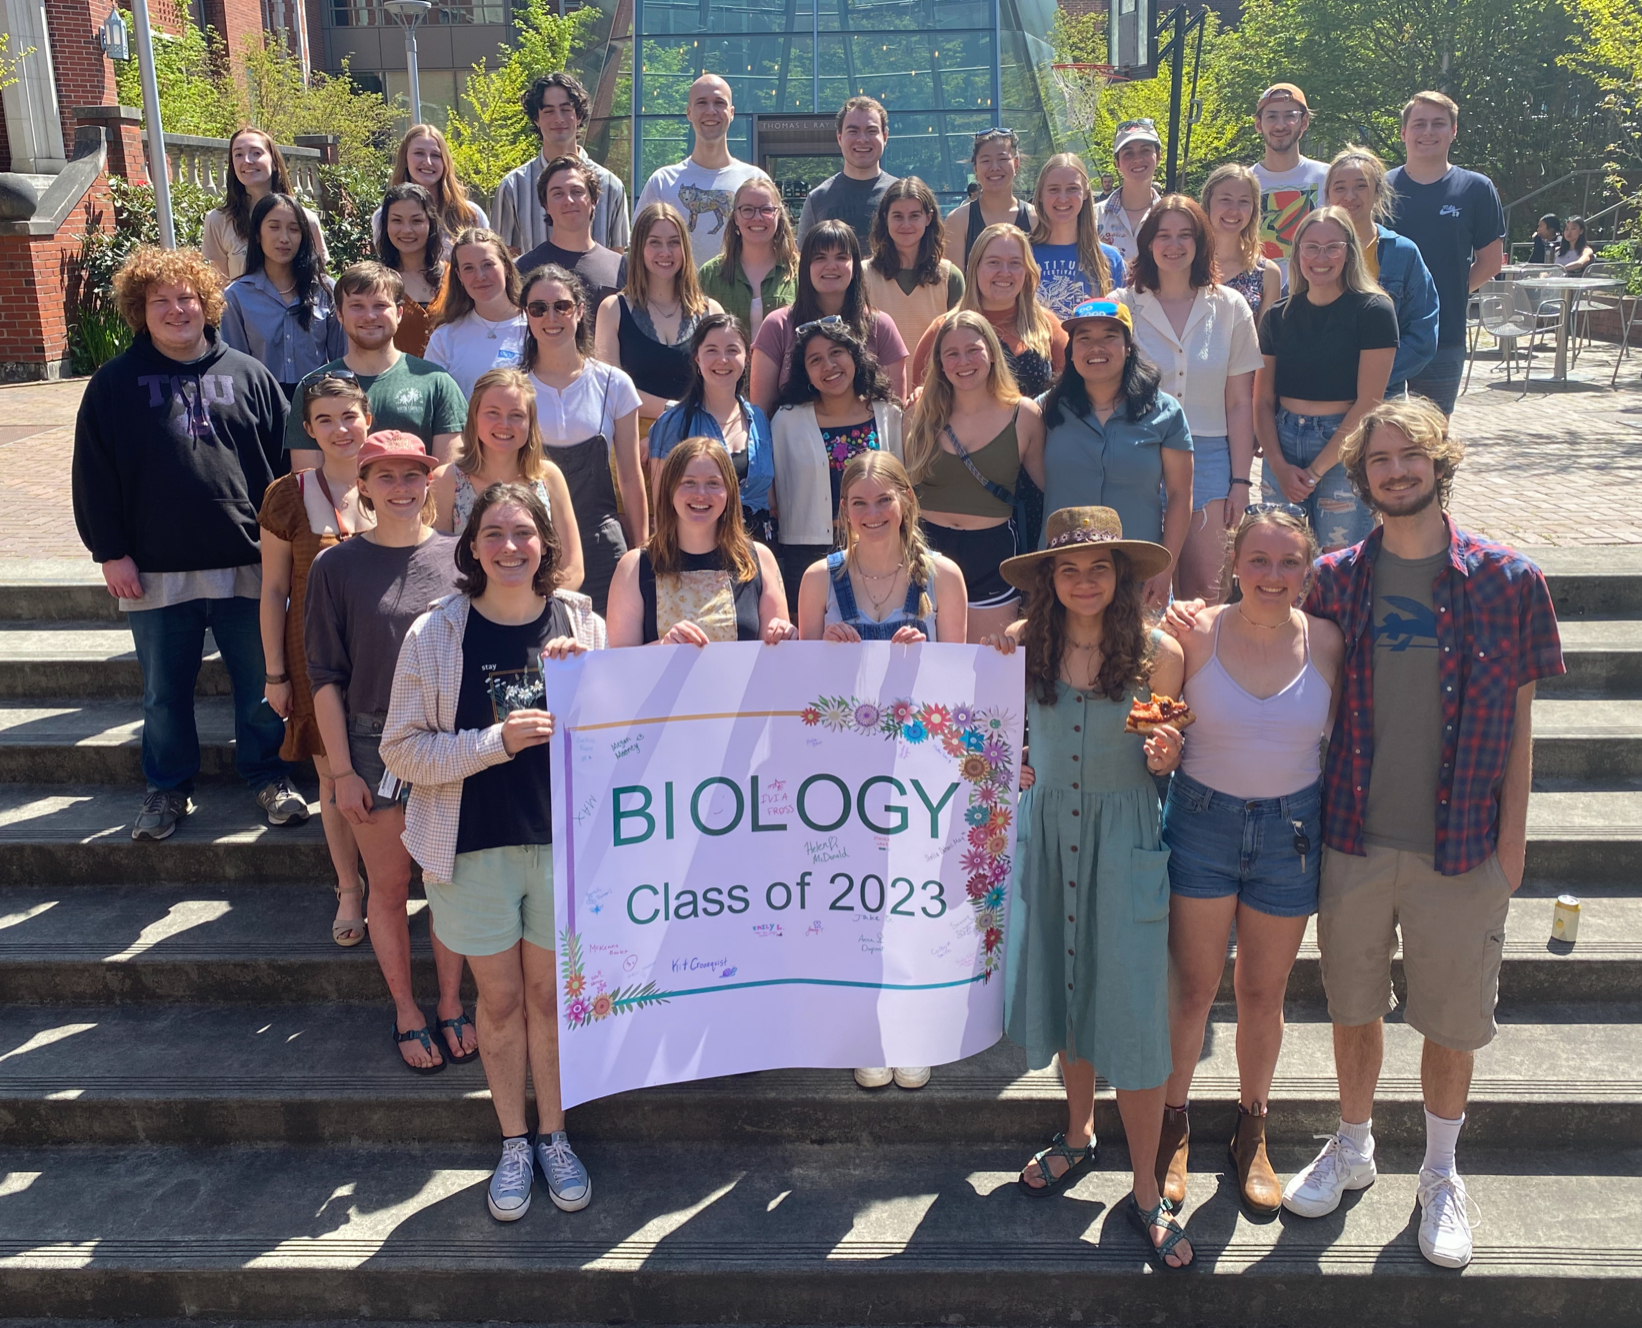 Biology students gathered for group photo holding Class of 2023 sign